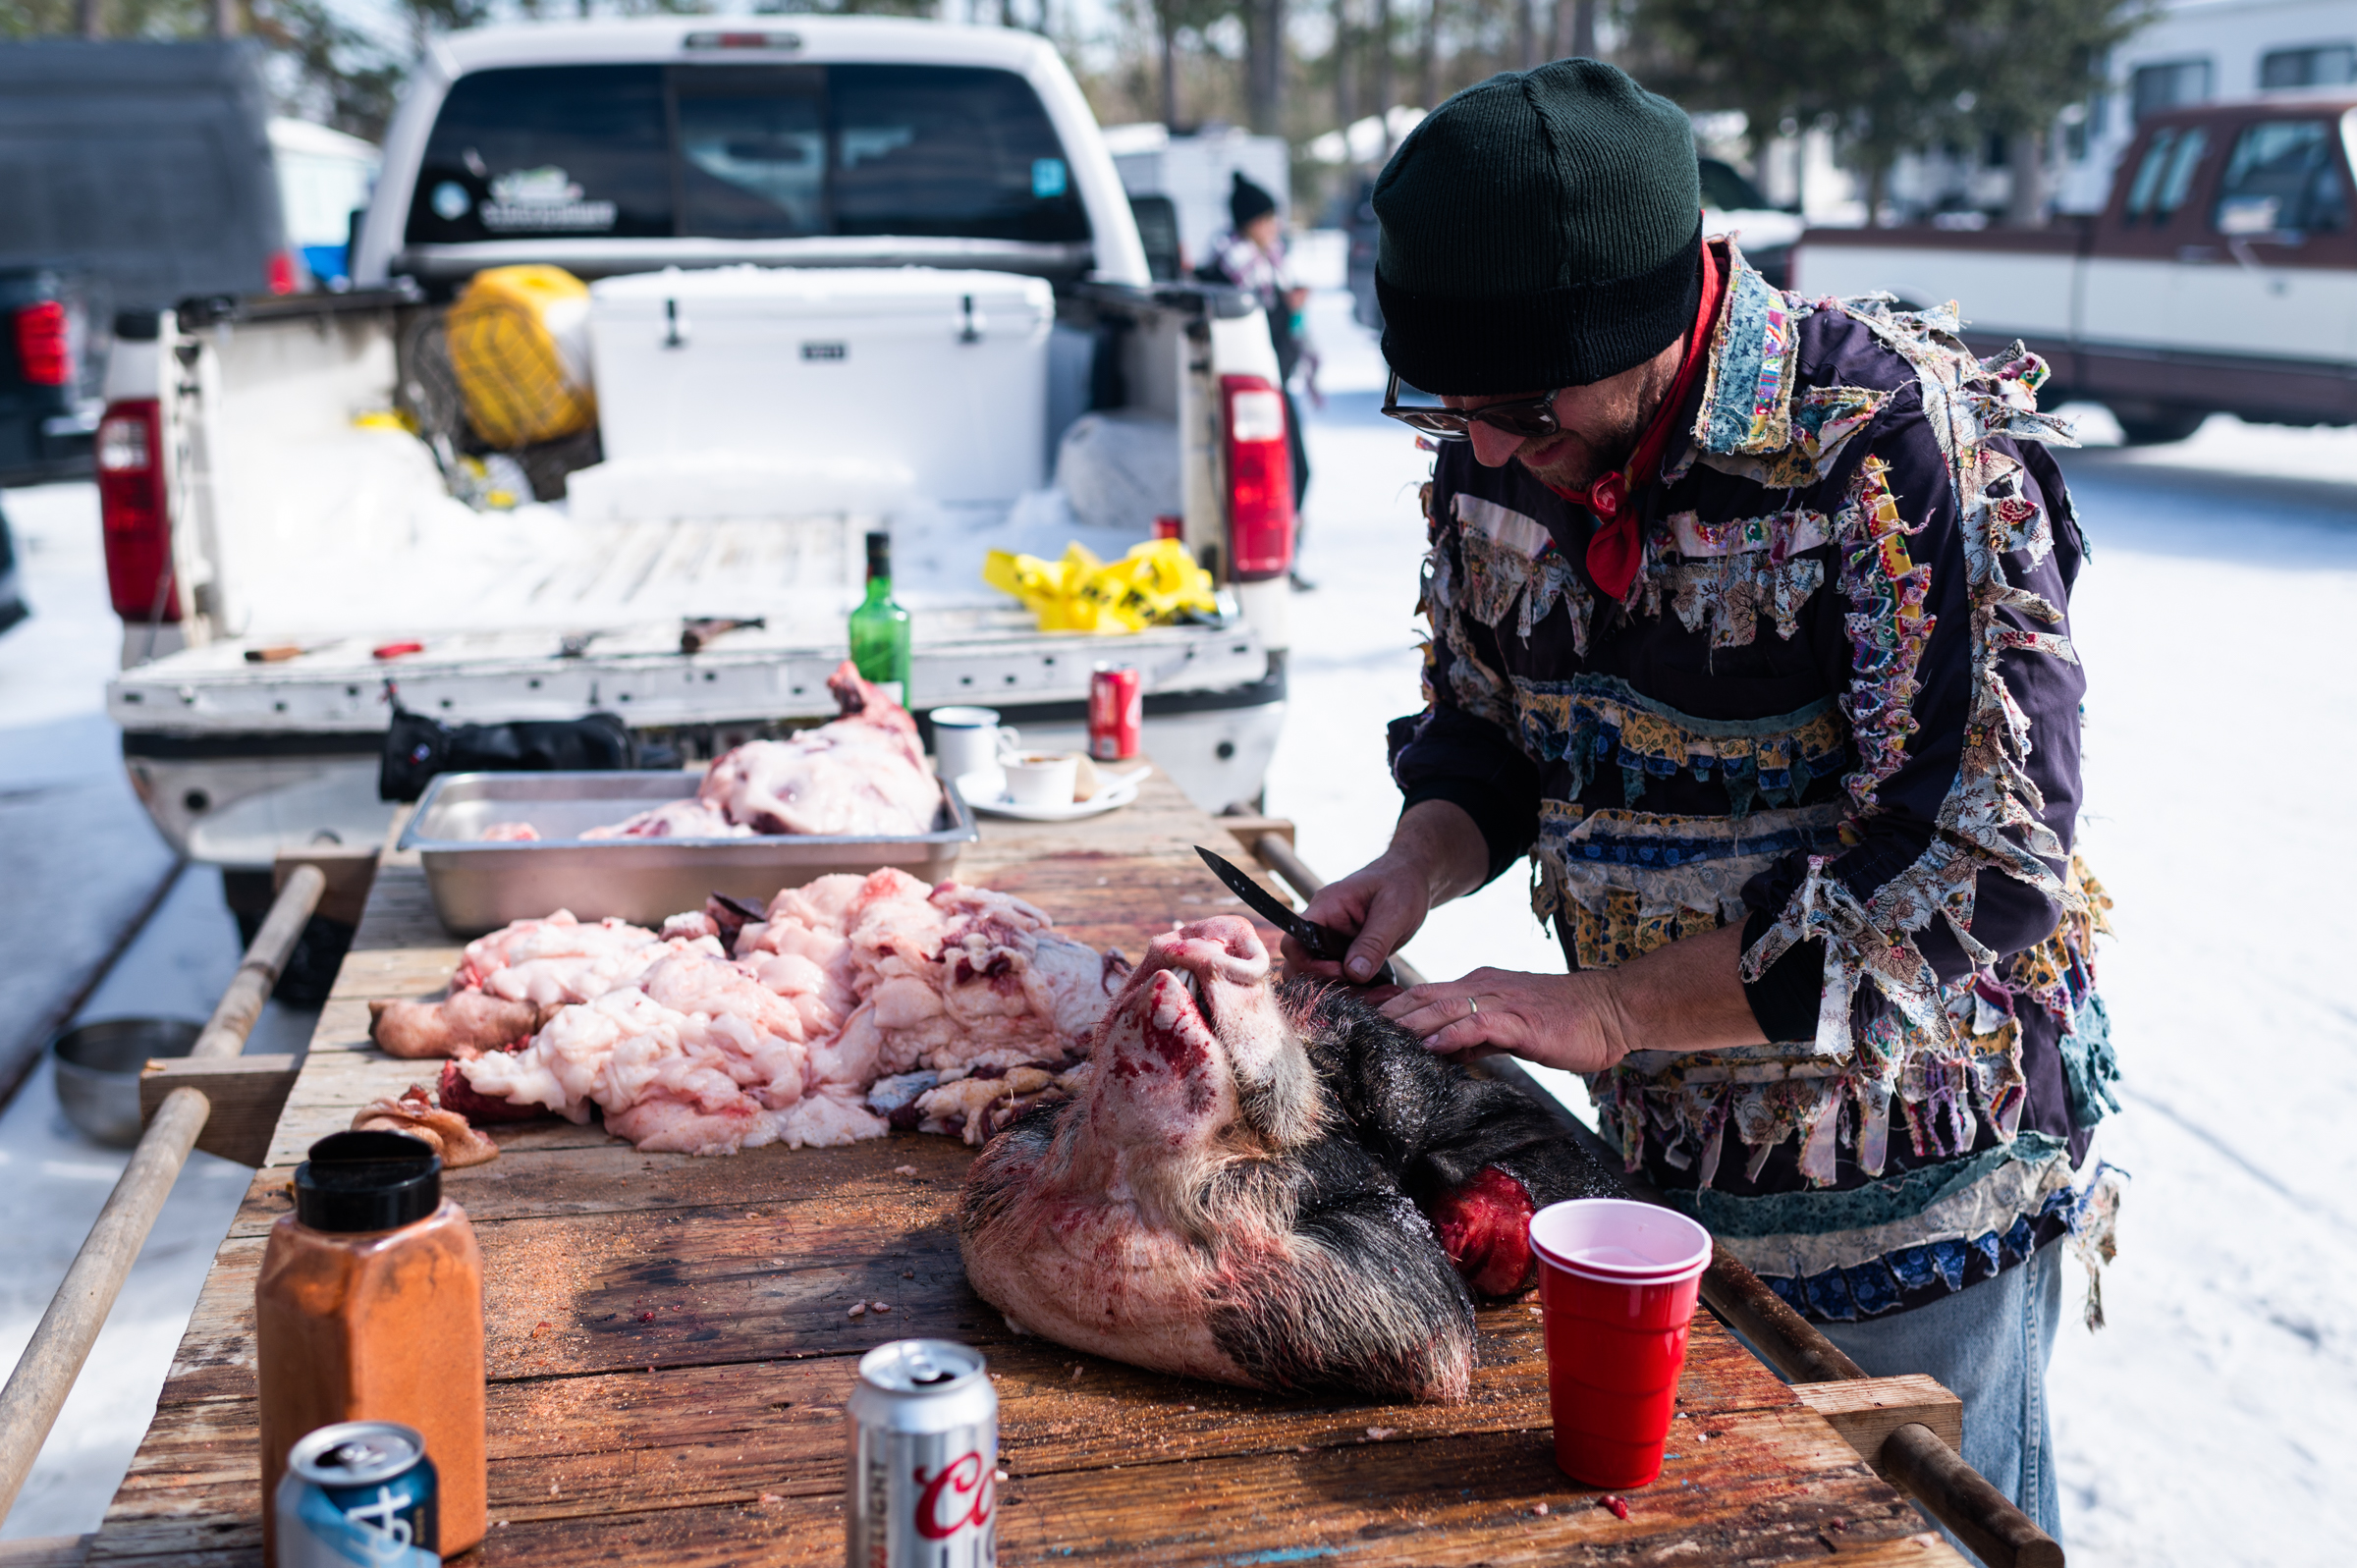 Bryan stands in front of the butchered hog on a custom butcher table